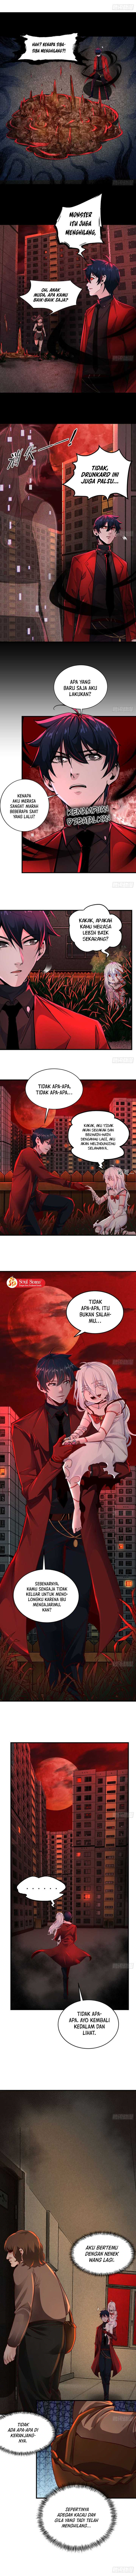 Since The Red Moon Appeared (Hongyue Start) Chapter 82 - 67